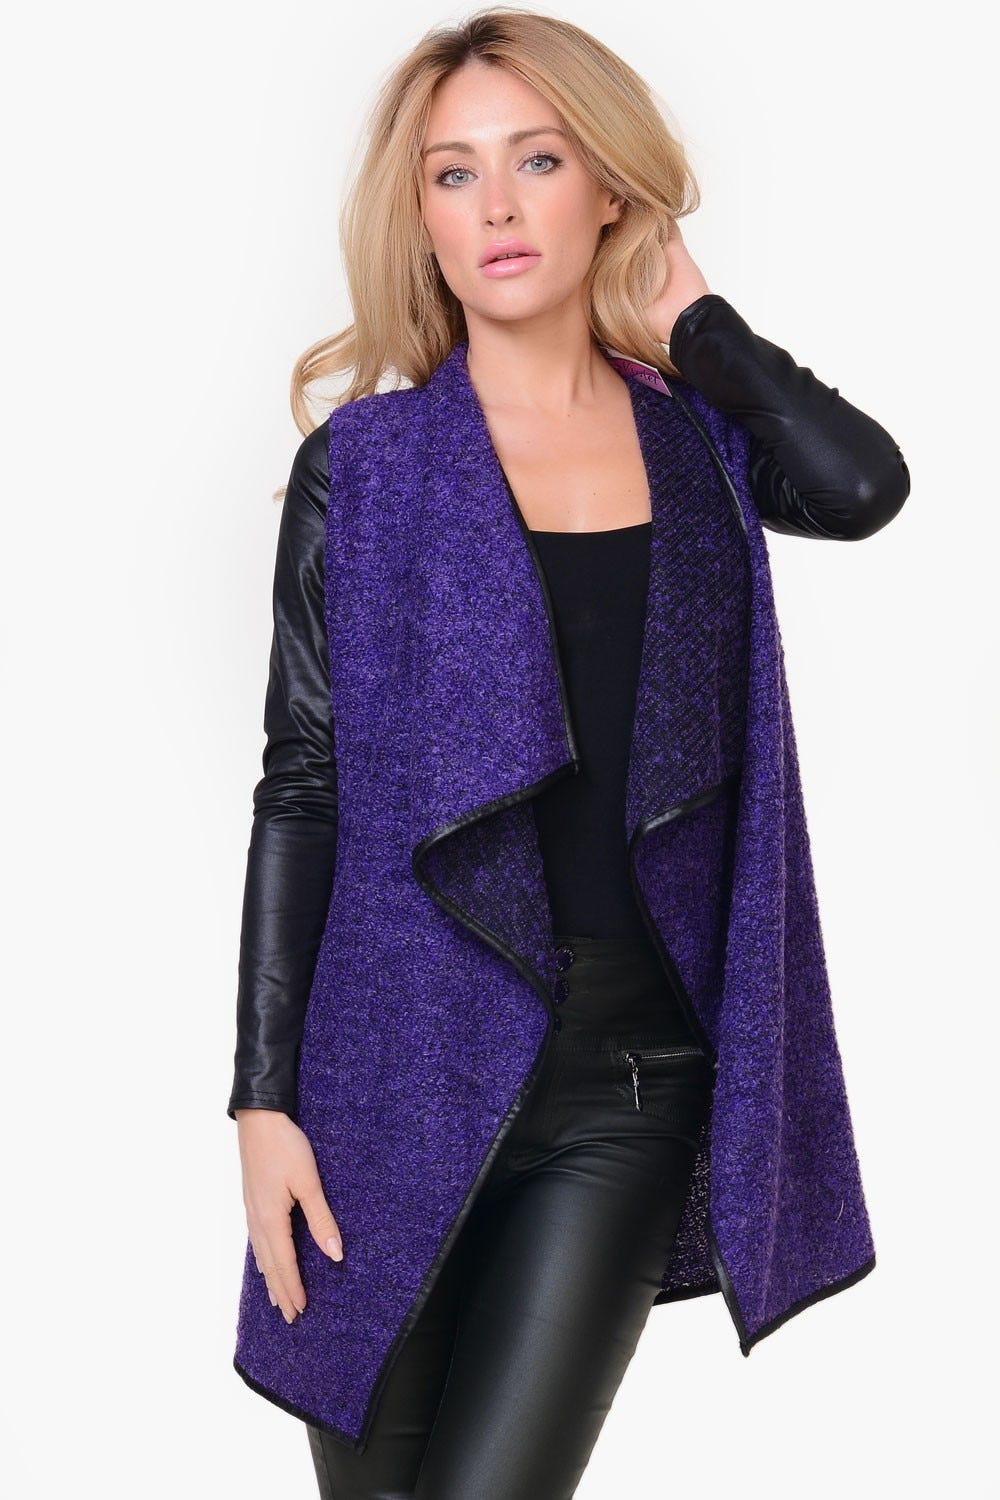 Purple Waterfall Cardigans For Women: Colour That Has Been Considered To Be  The Perfect Glamorous One | by Fredes Heden | Medium